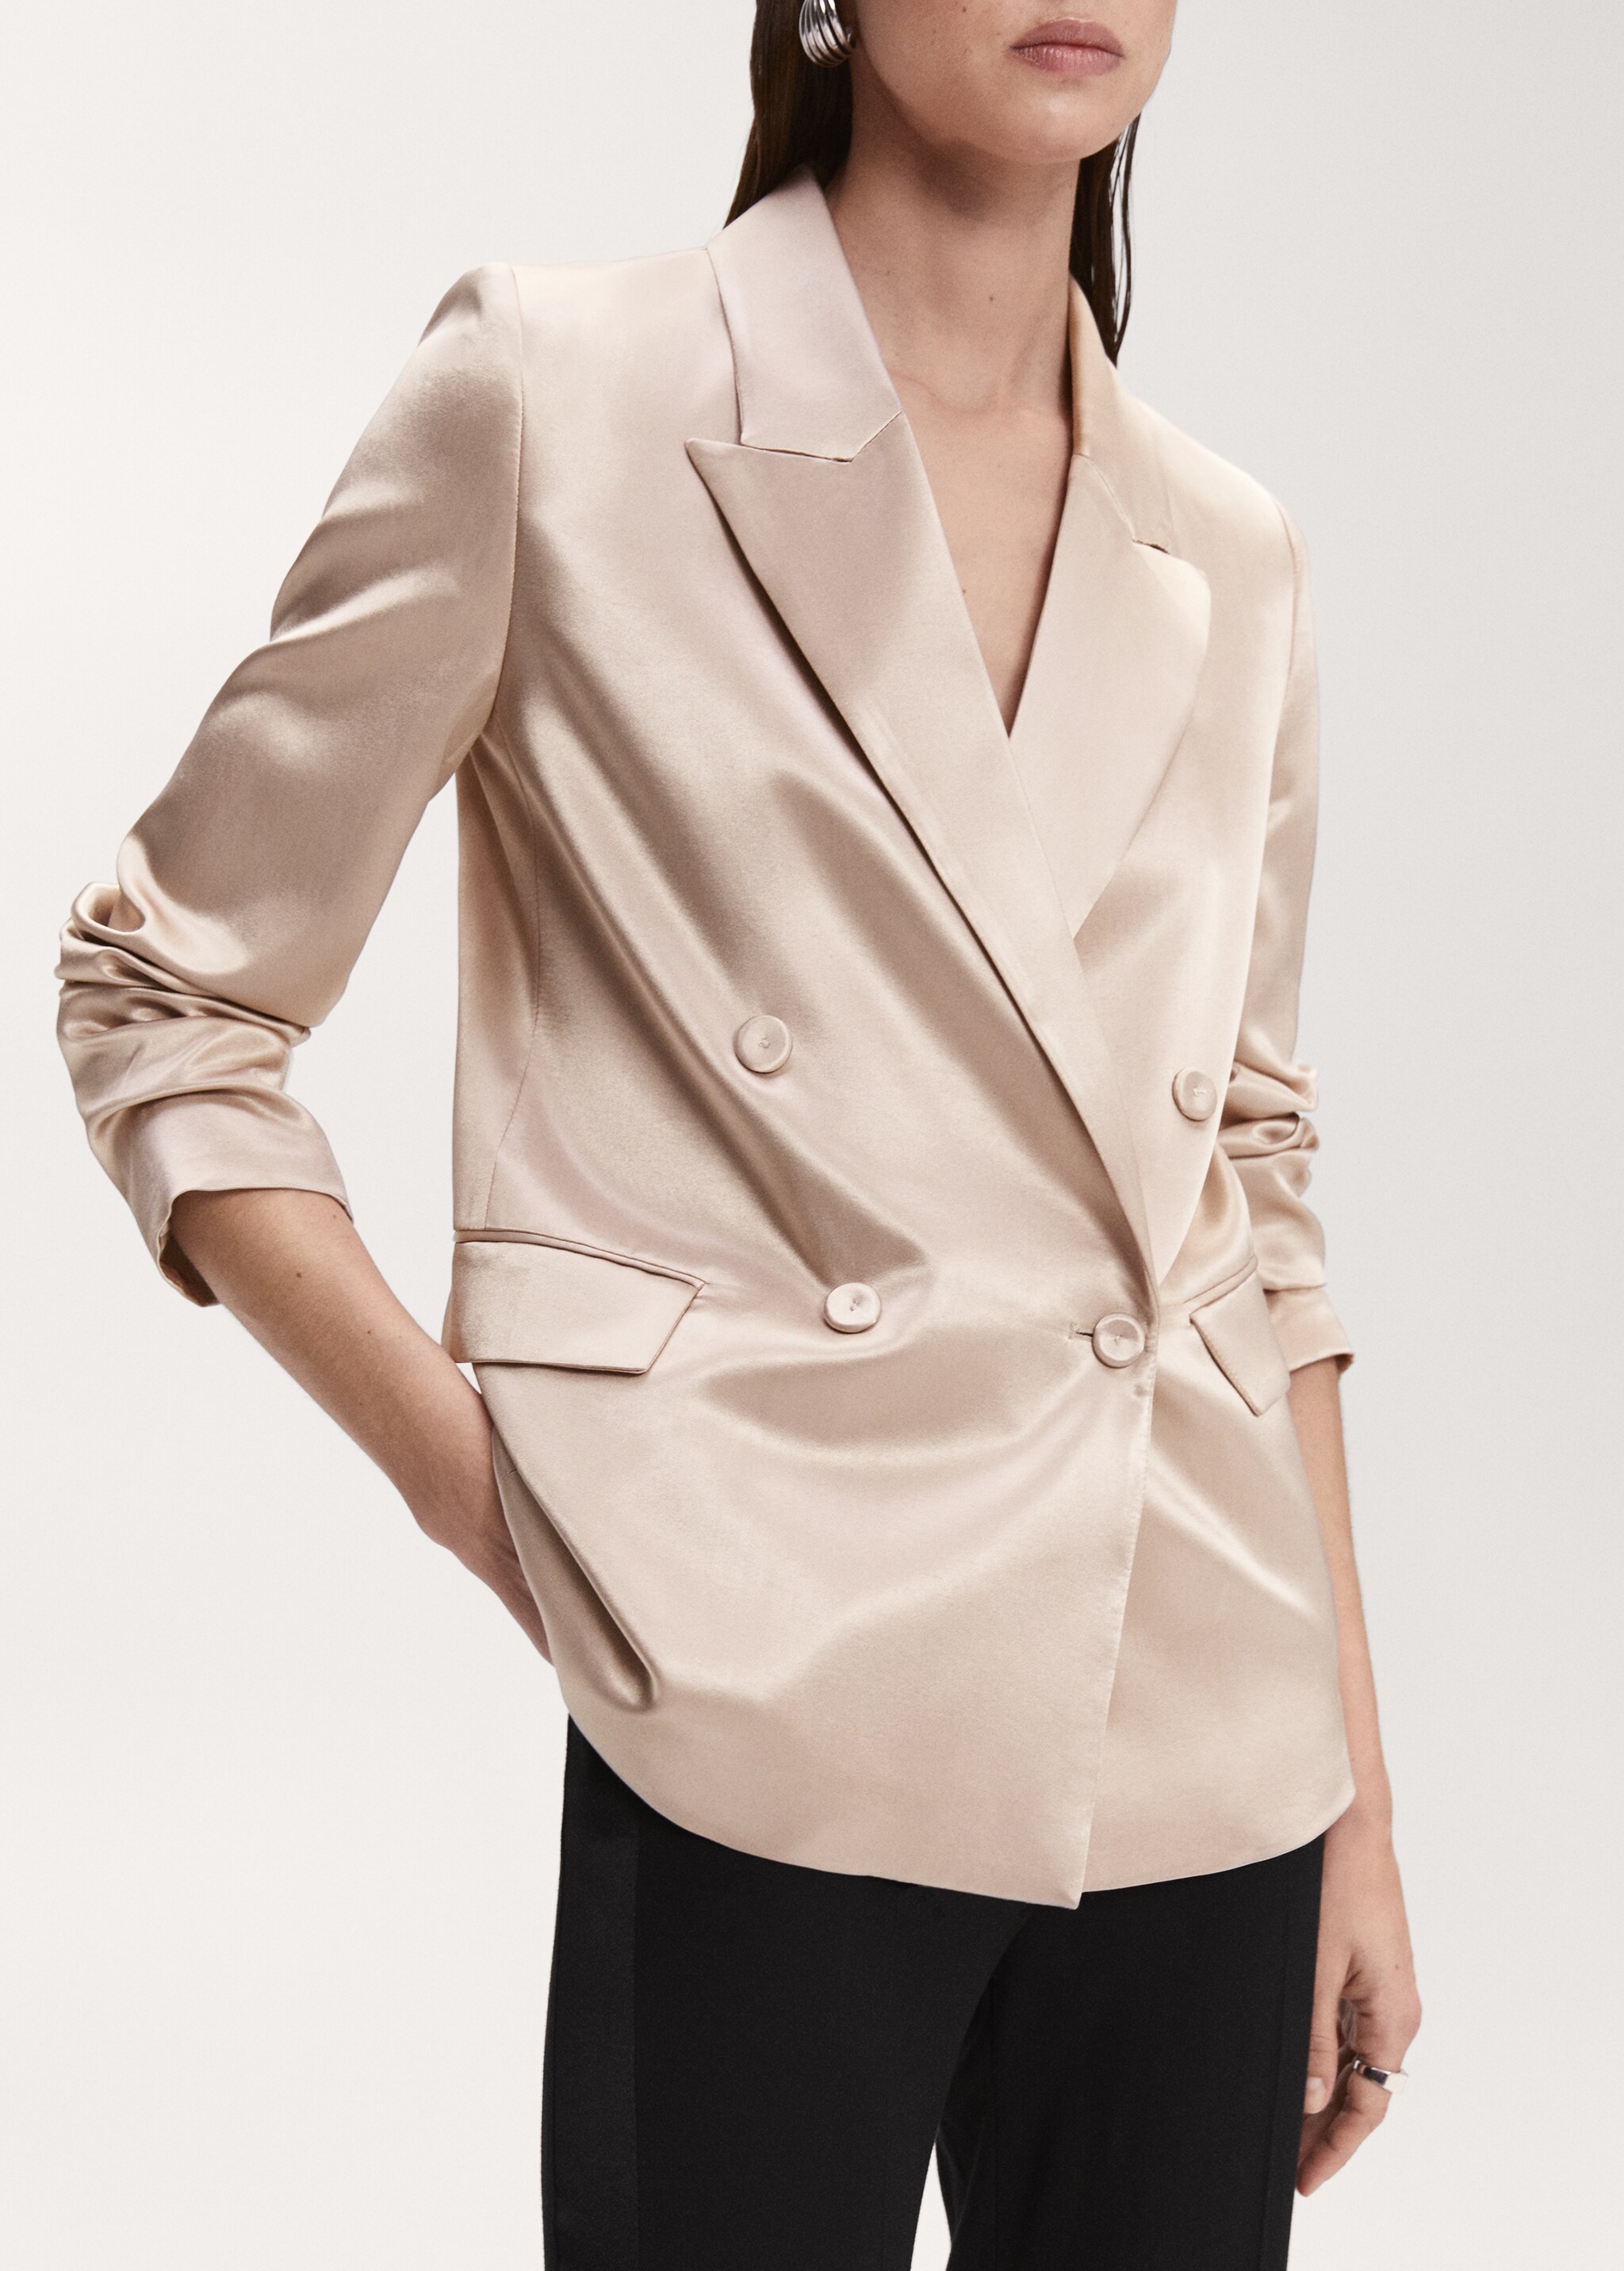 Satin-finish suit jacket - Details of the article 6